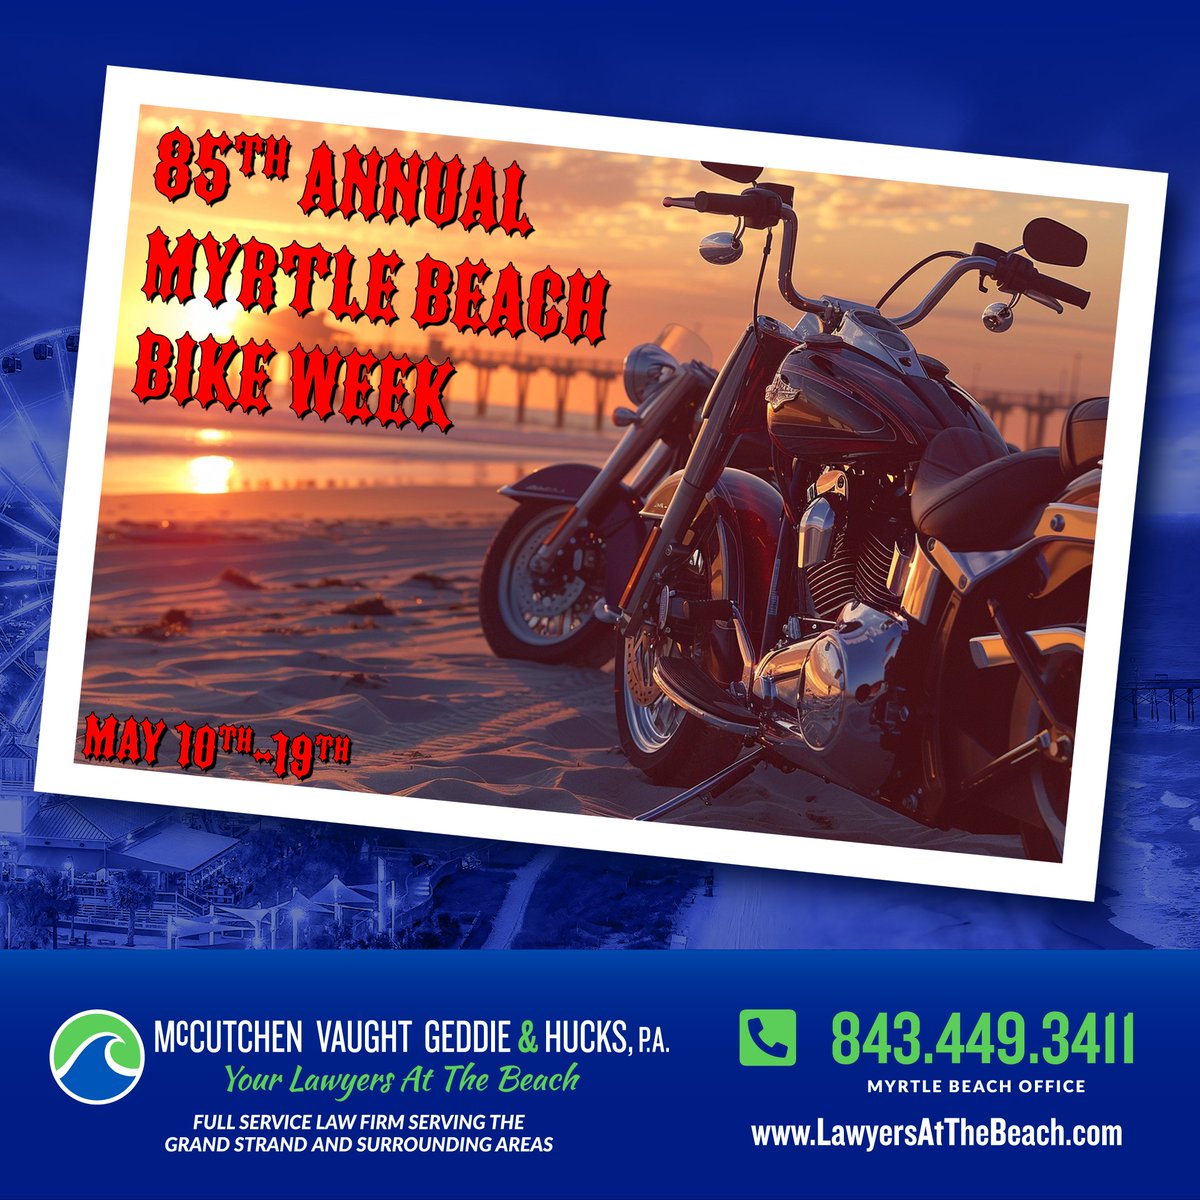 Roaring engines, coastal breeze, and the thrill of freedom—welcome to the 85th Annual Myrtle Beach Bike Week! As riders converge on the Grand Strand, remember to ride safe and enjoy the journey. We're here if you need us. #motorcyclelaw #bikeaccident